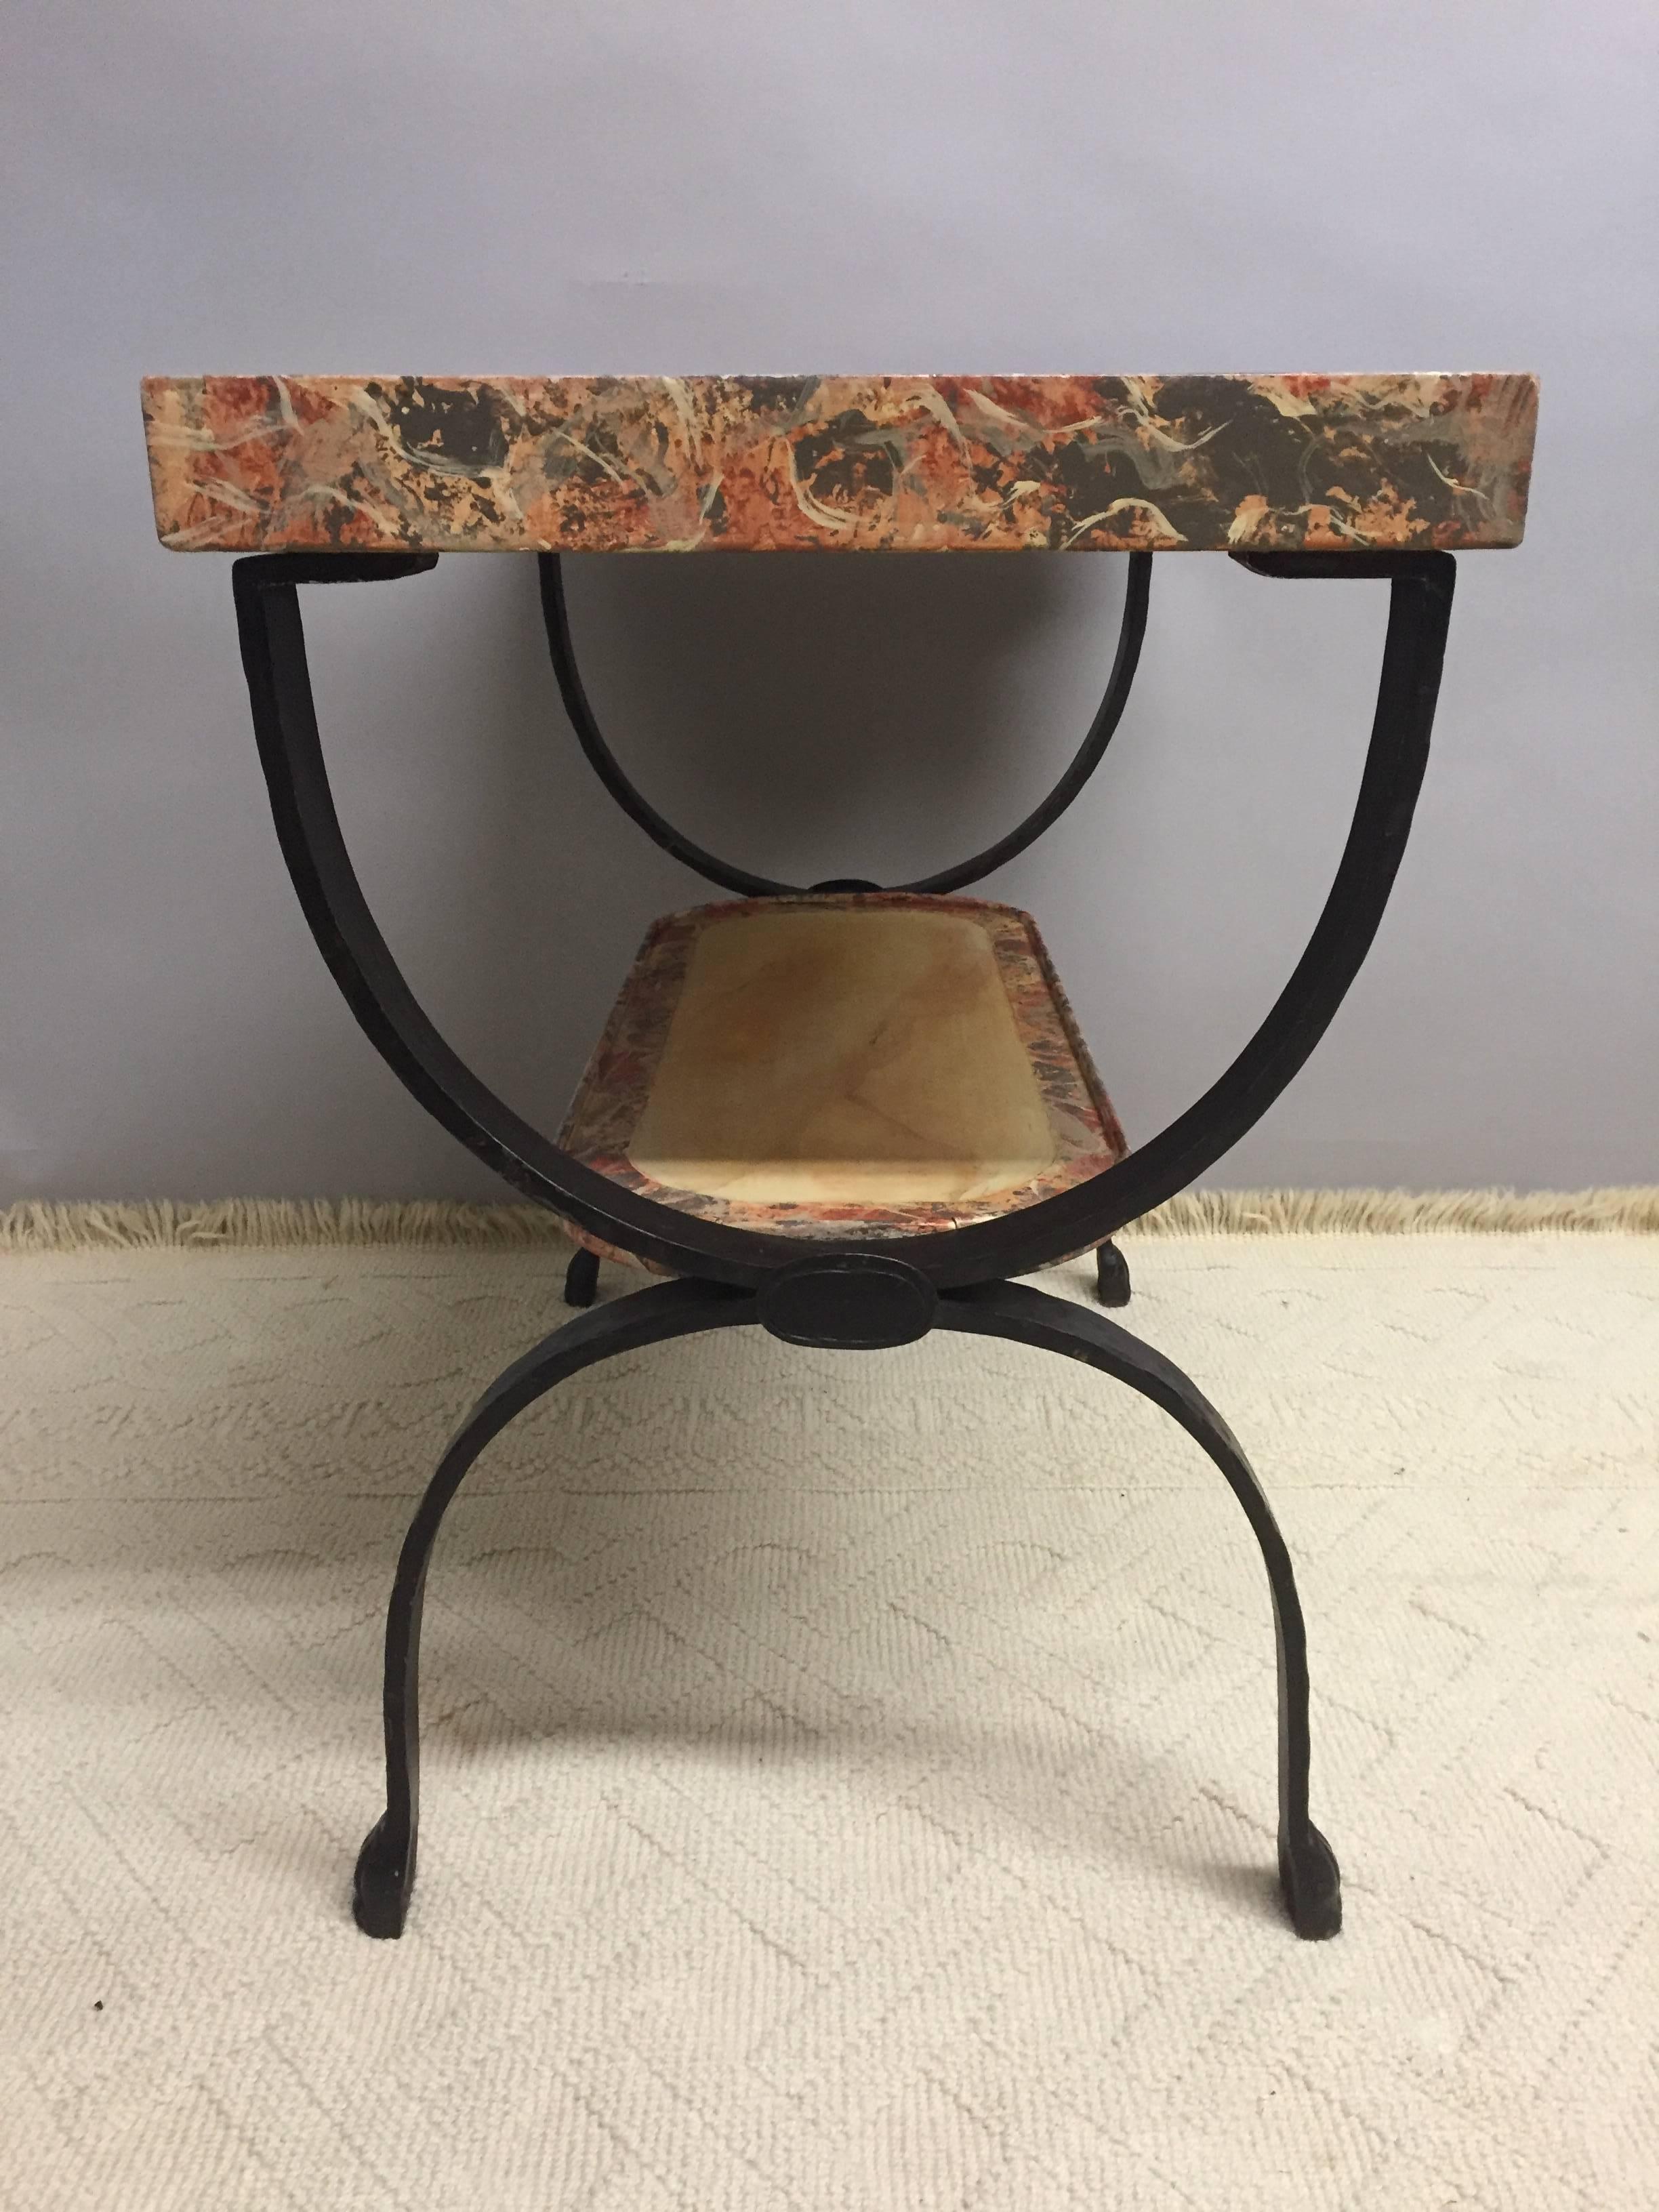 Handsome one of a kind end table having two tiers of hand-painted faux marbleized surfaces with a central cream rectangle, outlined in rouge, cream and grey. U shaped black wrought iron legs.
 